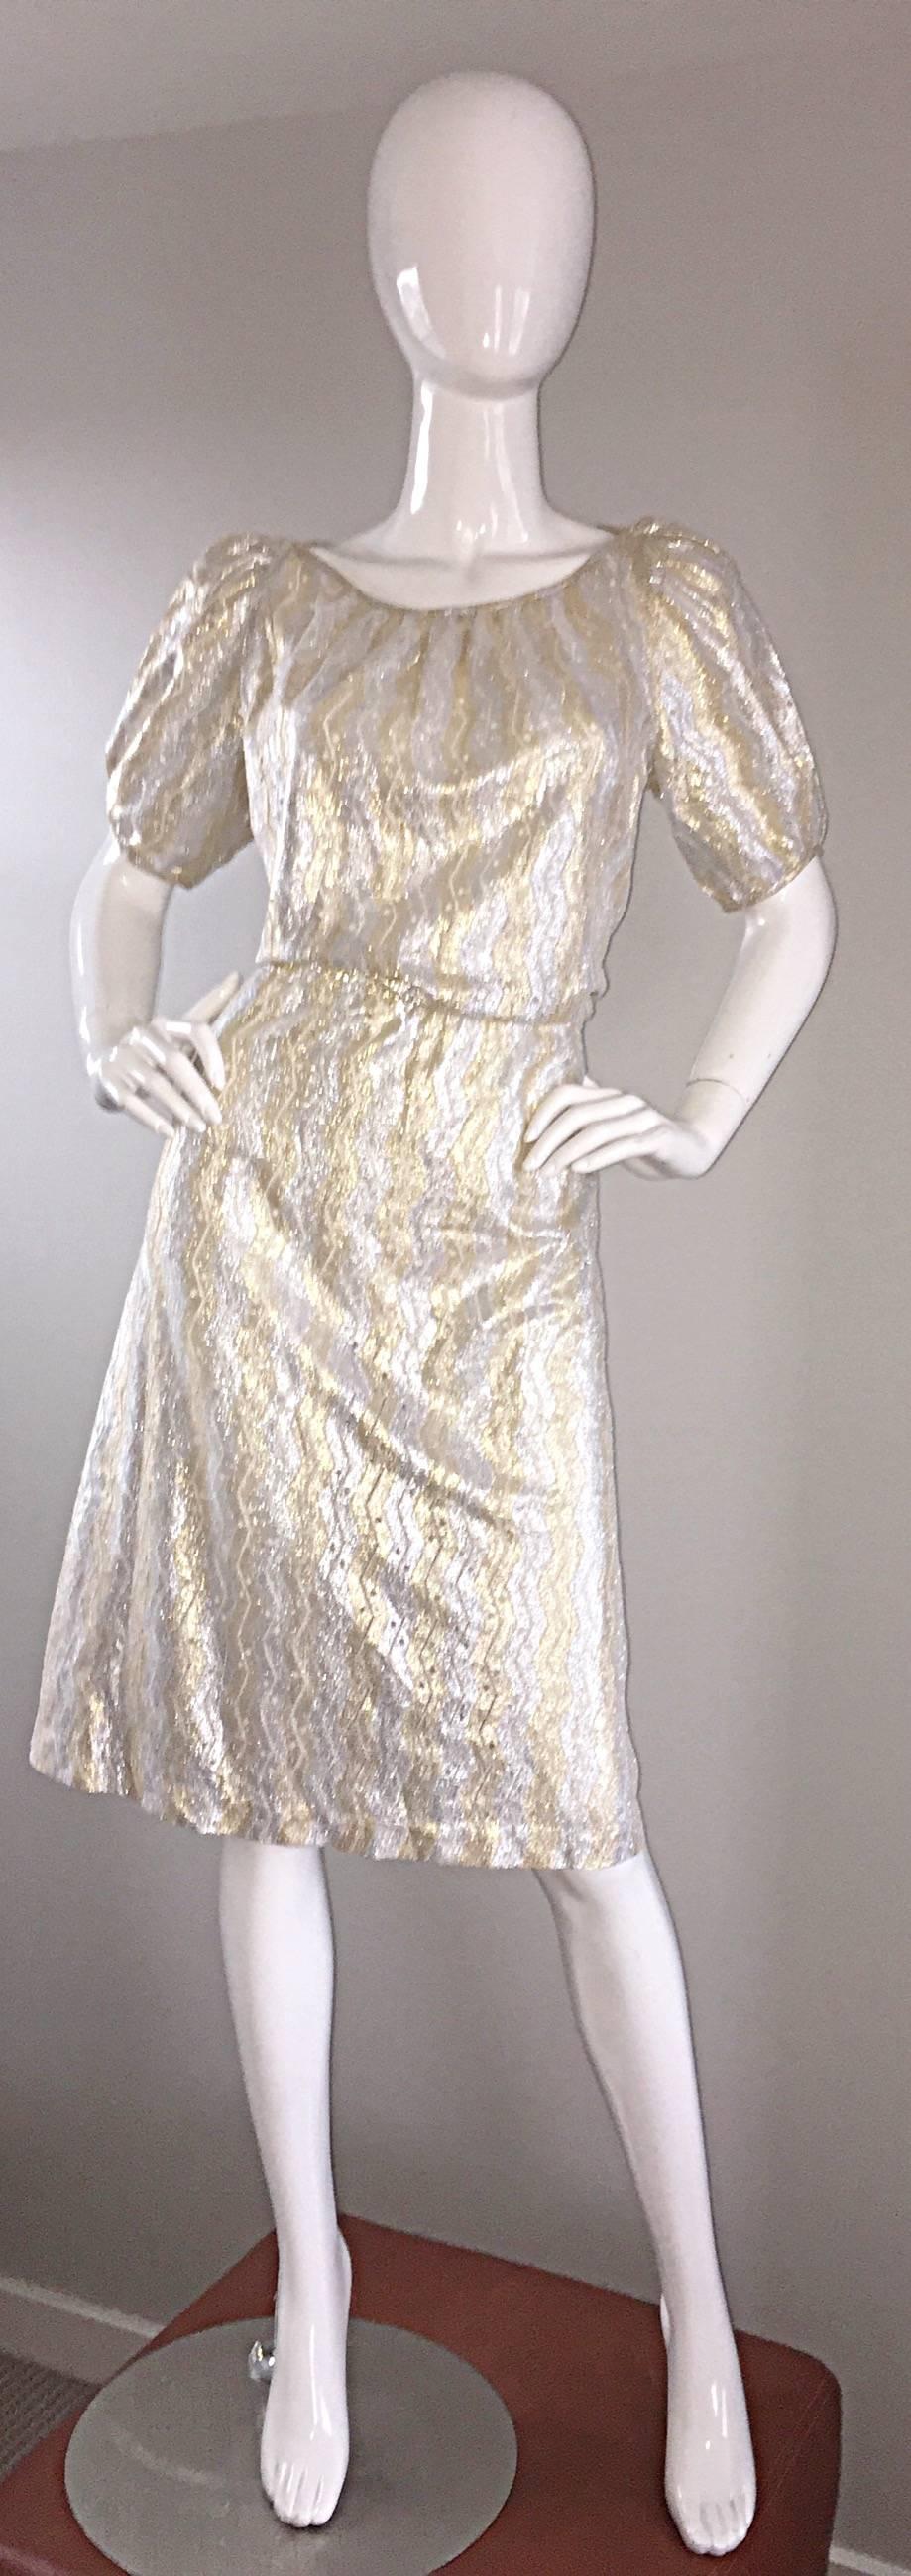 Amazing, brand new with original store tags, SULTANA / ADINI silver and gold metallic short sleeve dress! Super rare, hard-to-find India designer dress. Features zig-zag stripes, with semi-sheer crochet detail throughout. Slight puff sleeves, with